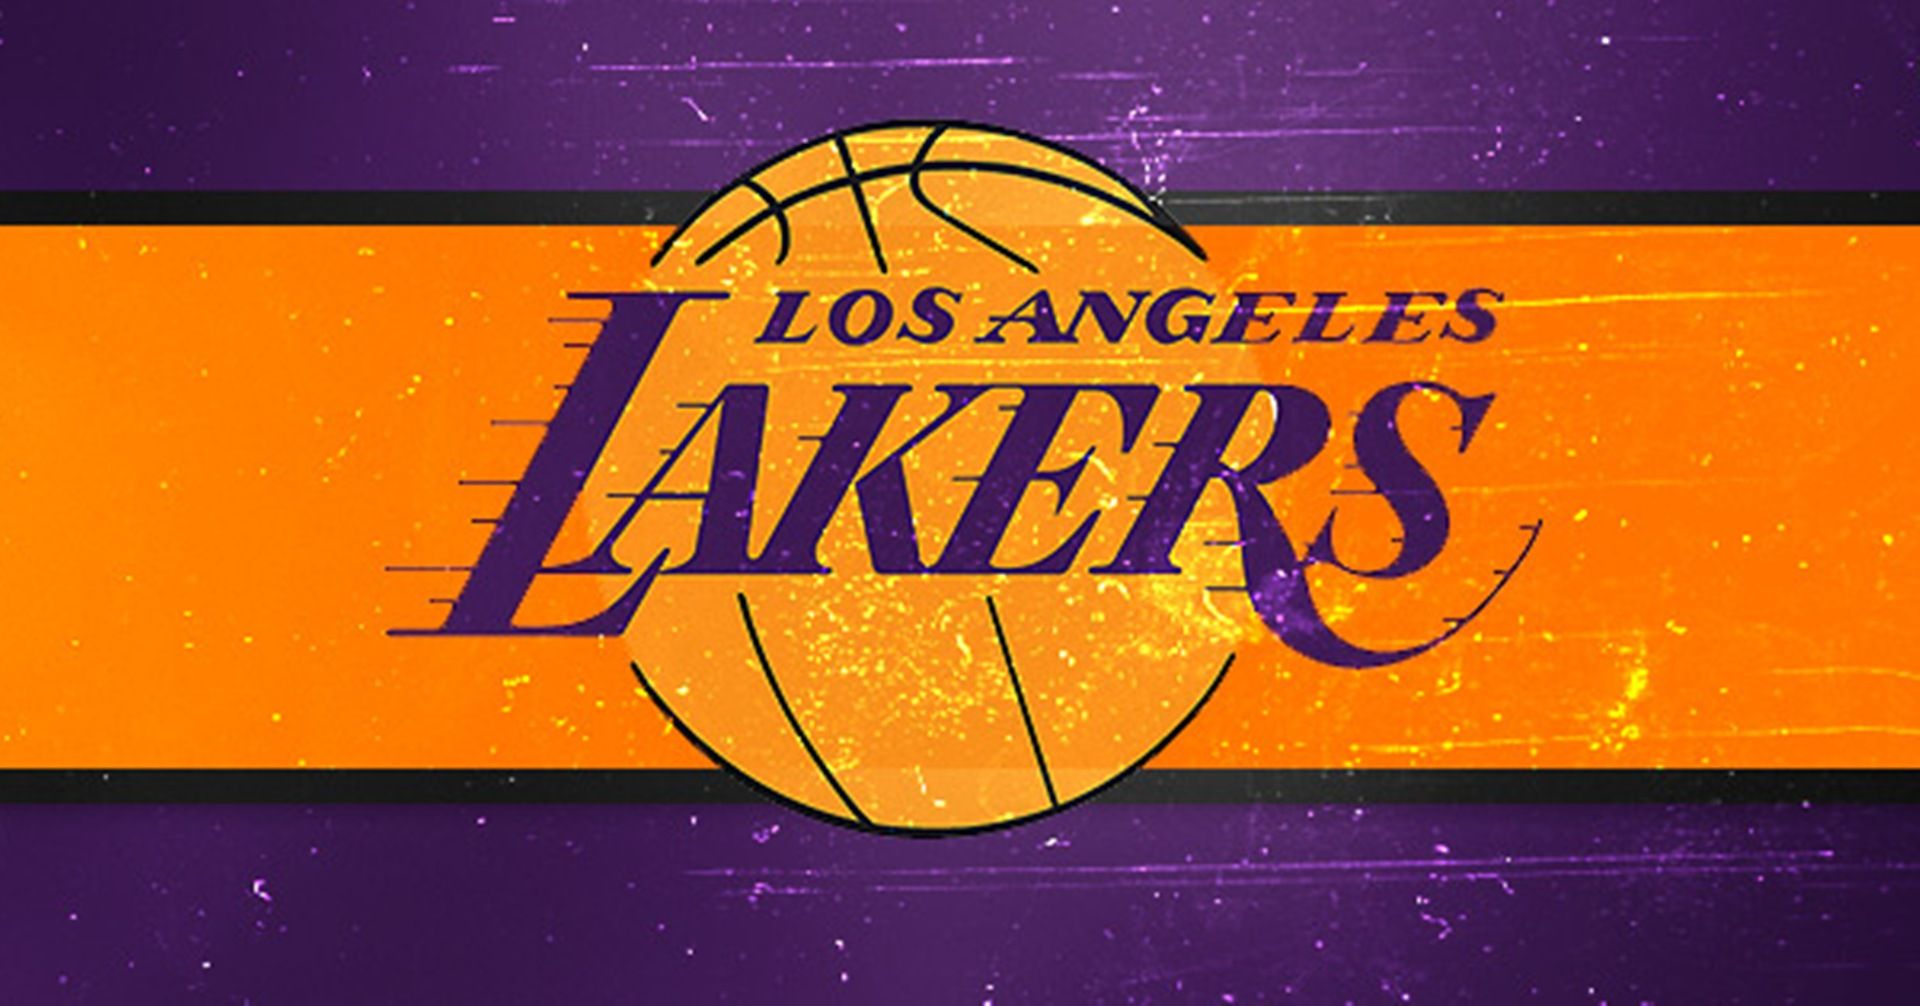 Lakers Wallpapers Archives - Wallpaper